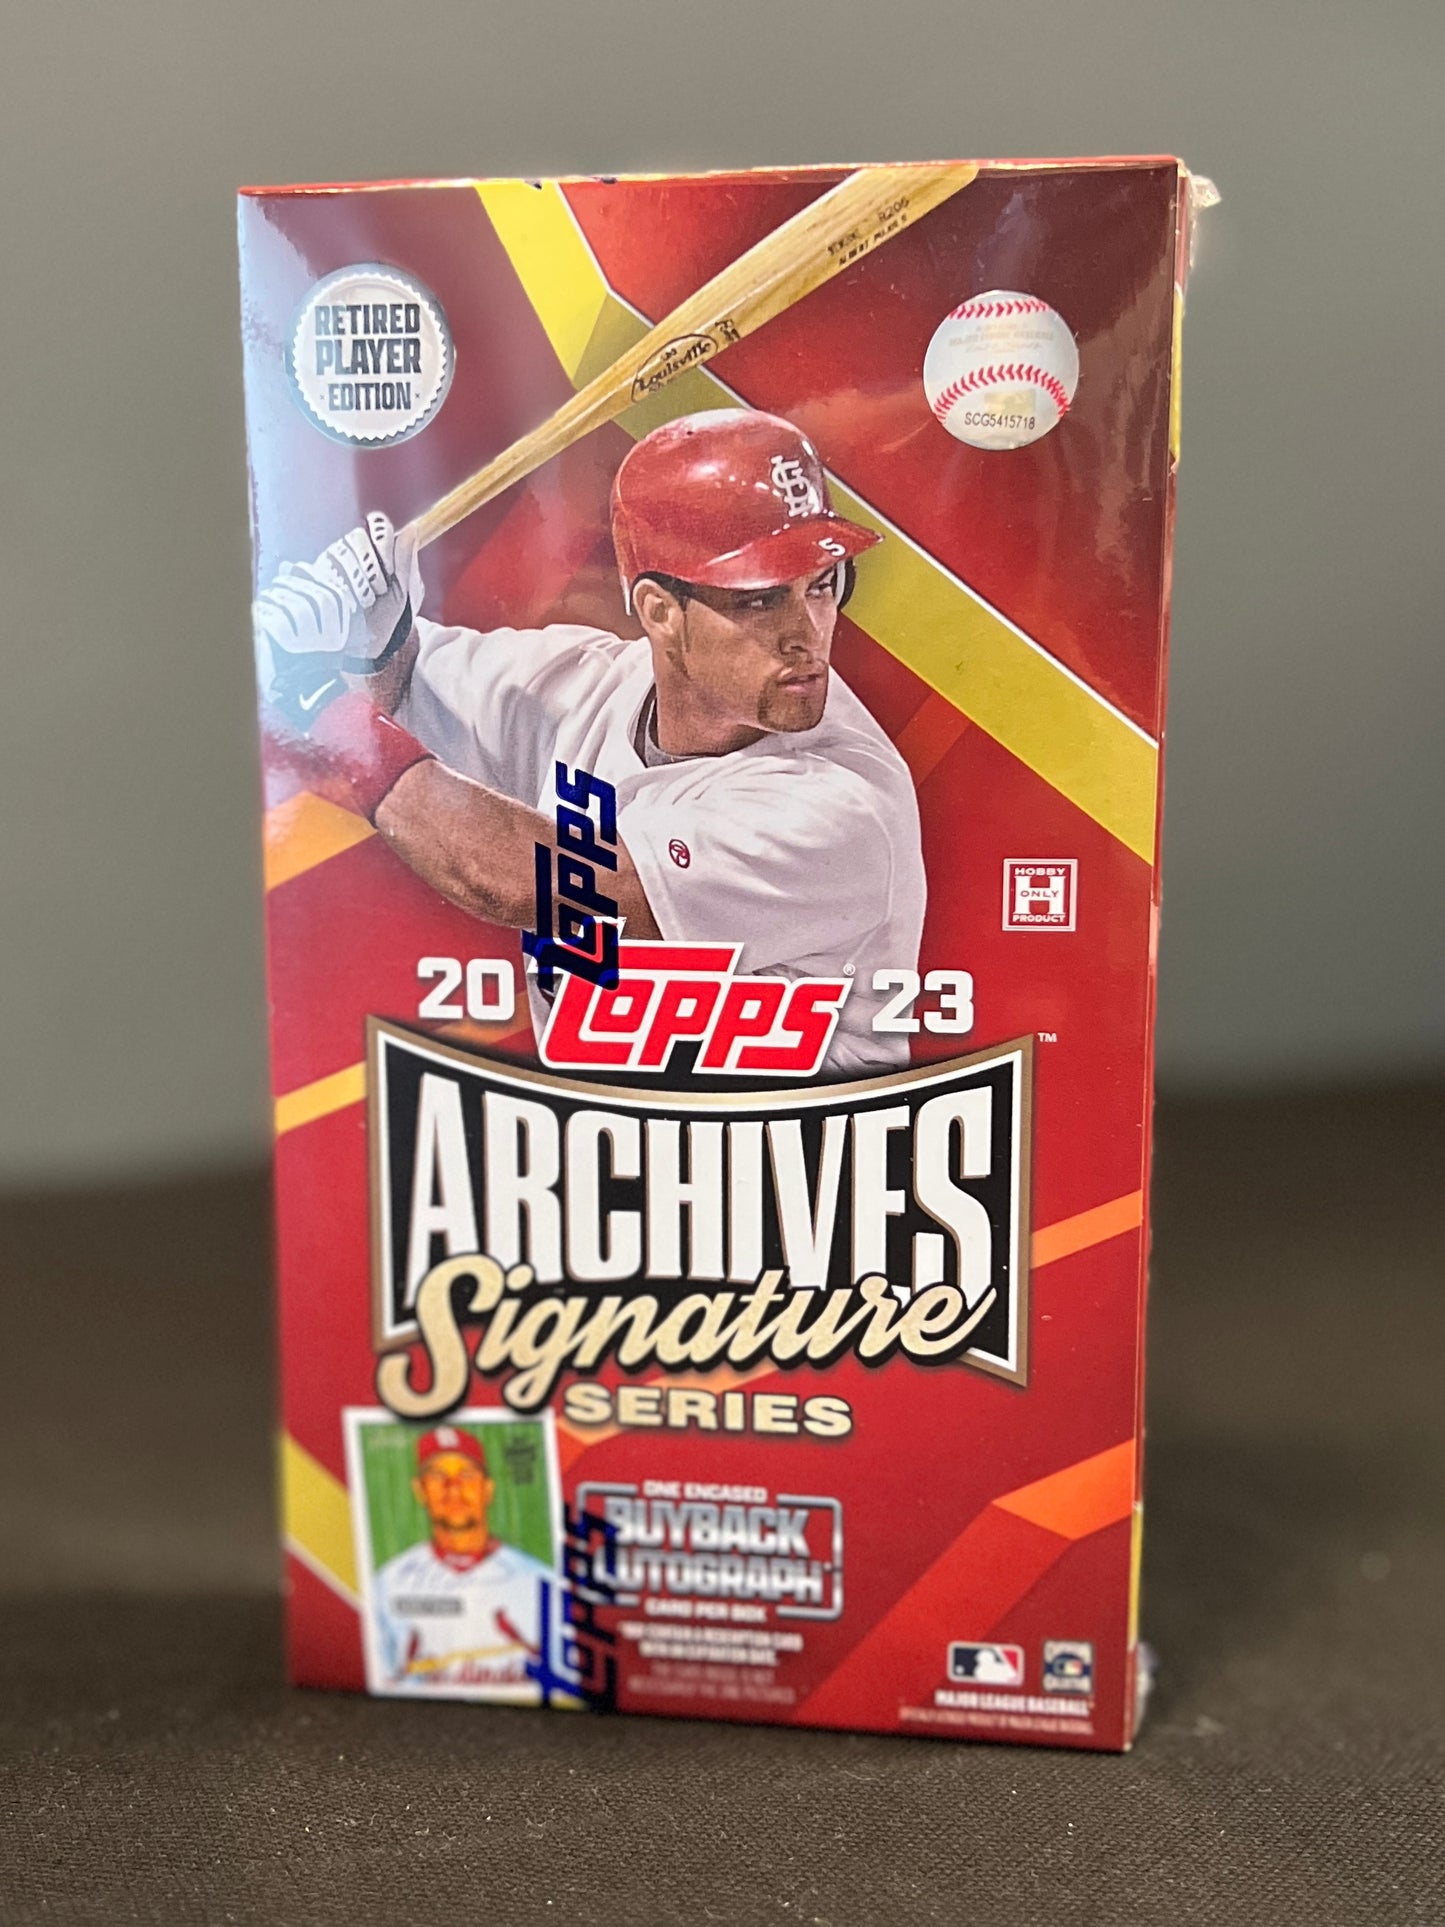 2023 Topps Archives Signature Series Retired Player Edition Mixer